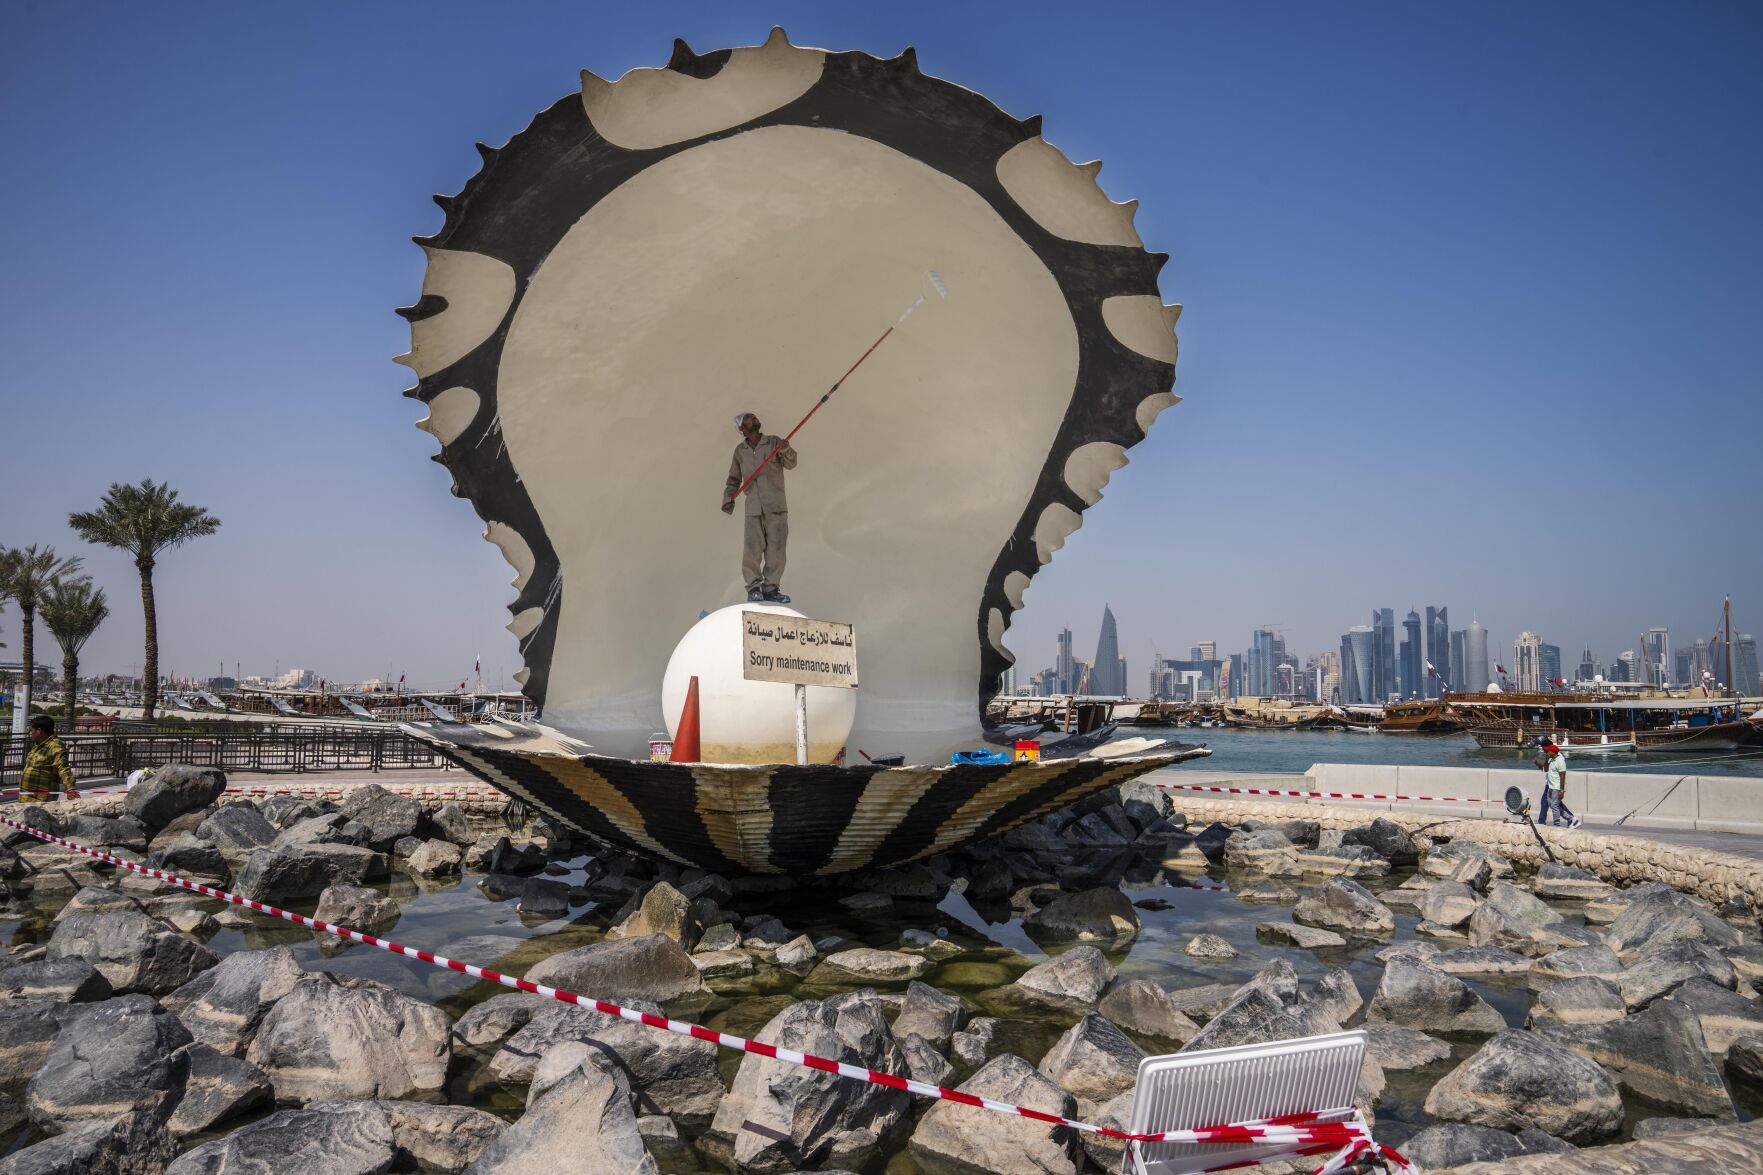 <p>A migrant laborer paints The Pearl Monument, a sculpture depicting an open oyster shell with running water, on the corniche, overlooking the skyline of Doha, Qatar, Wednesday, Oct. 19, 2022. One of the world’s biggest sporting events has thrown an uncomfortable spotlight on Qatar’s labor system, which links workers’ visas to employers and keeps wages low for workers toiling in difficult conditions. (AP Photo/Nariman El-Mofty)</p>   PHOTO CREDIT: Nariman El-Mofty 